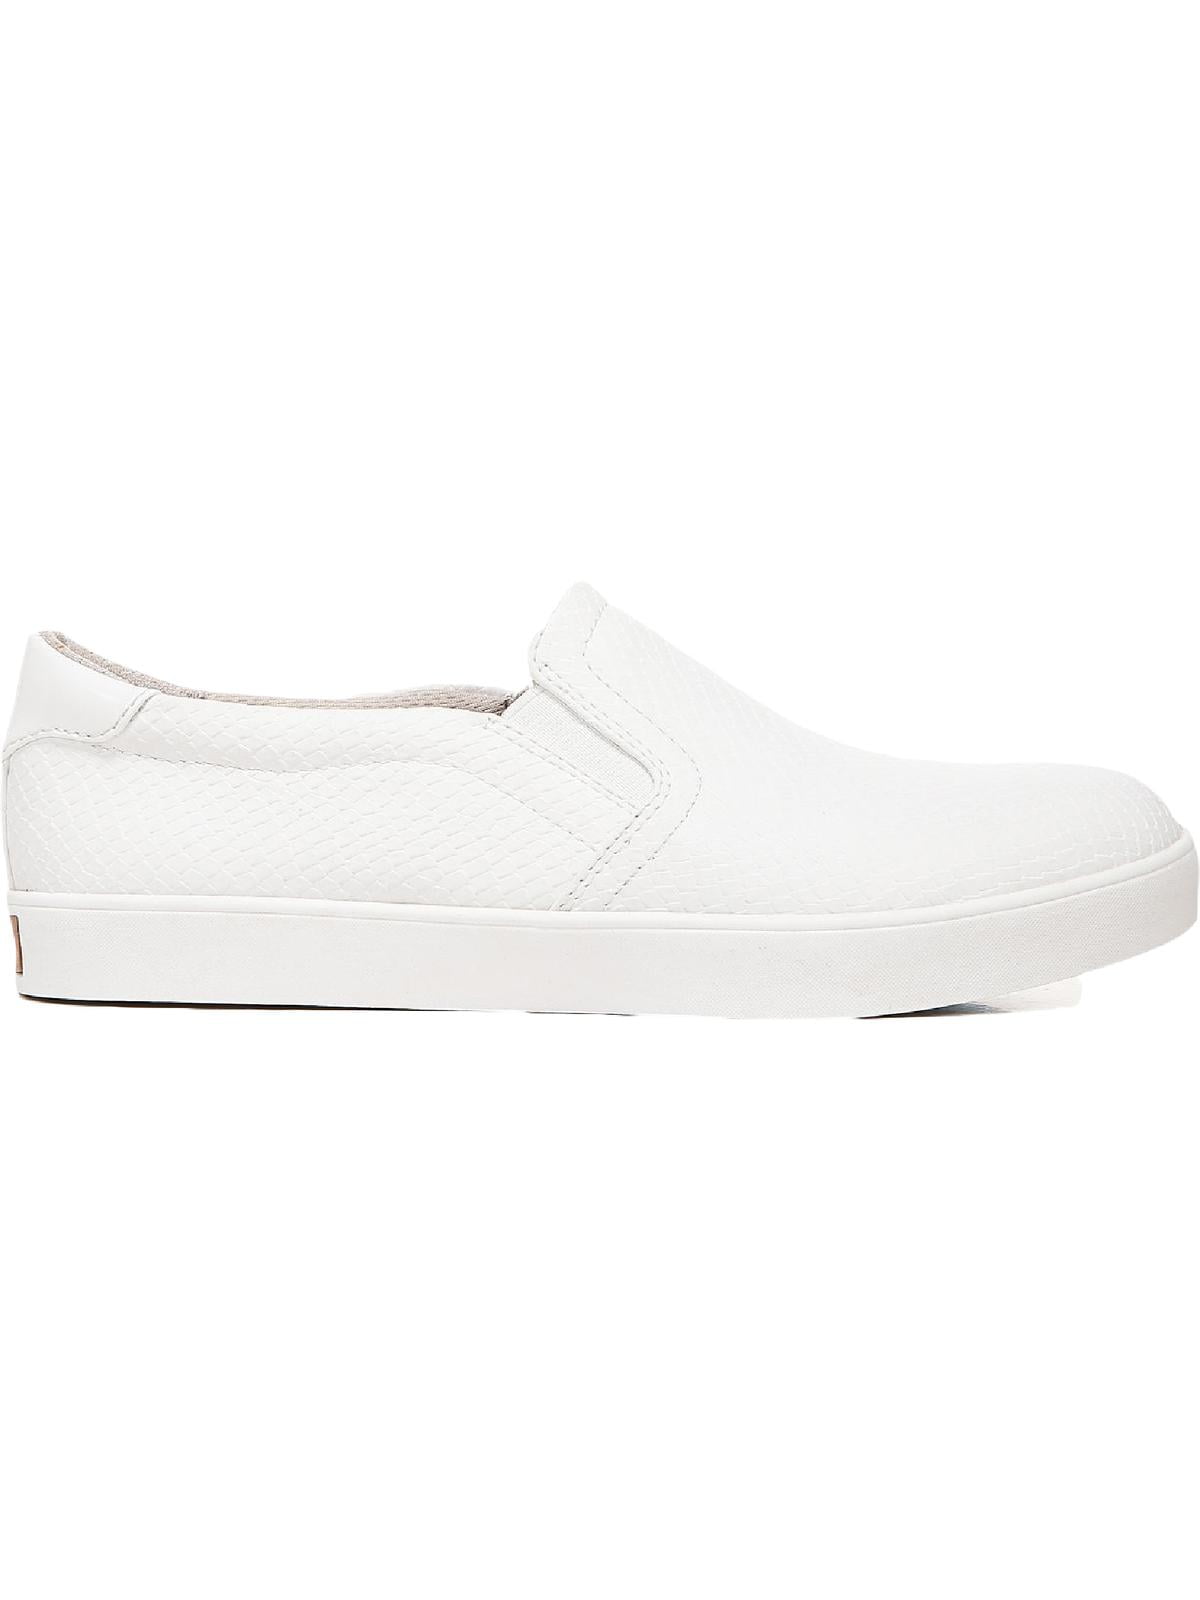 Dr. Scholl's Shoes Womens Madison Faux Leather Lifestyle Slip-On ...